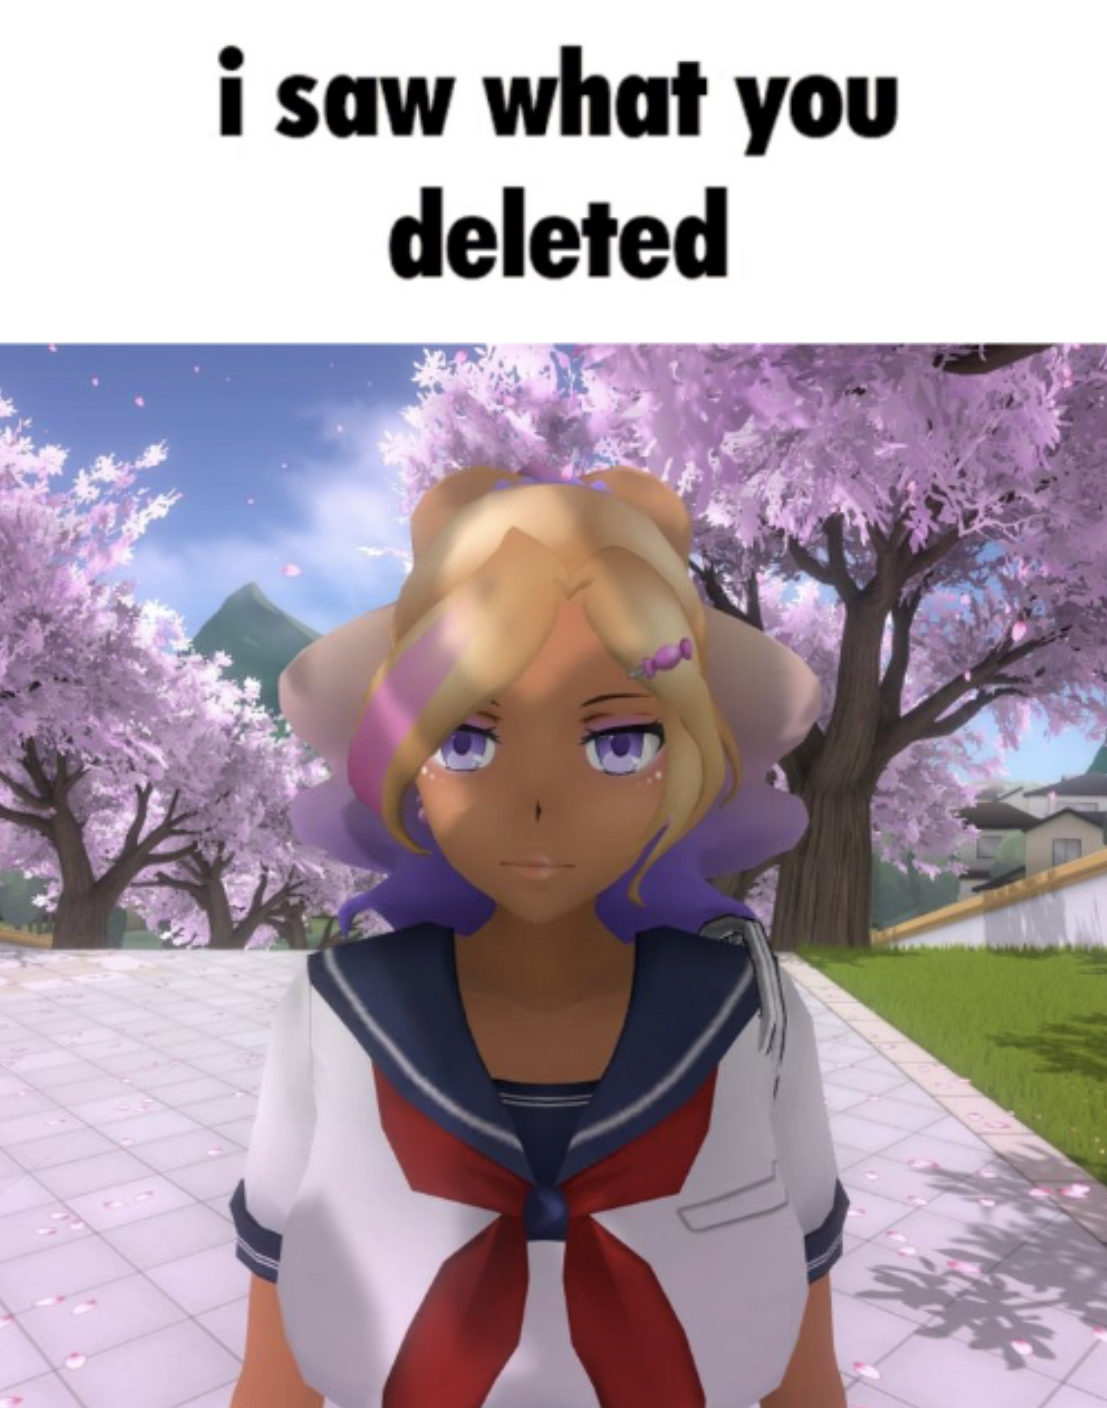 i saw what you deleted Blank Meme Template